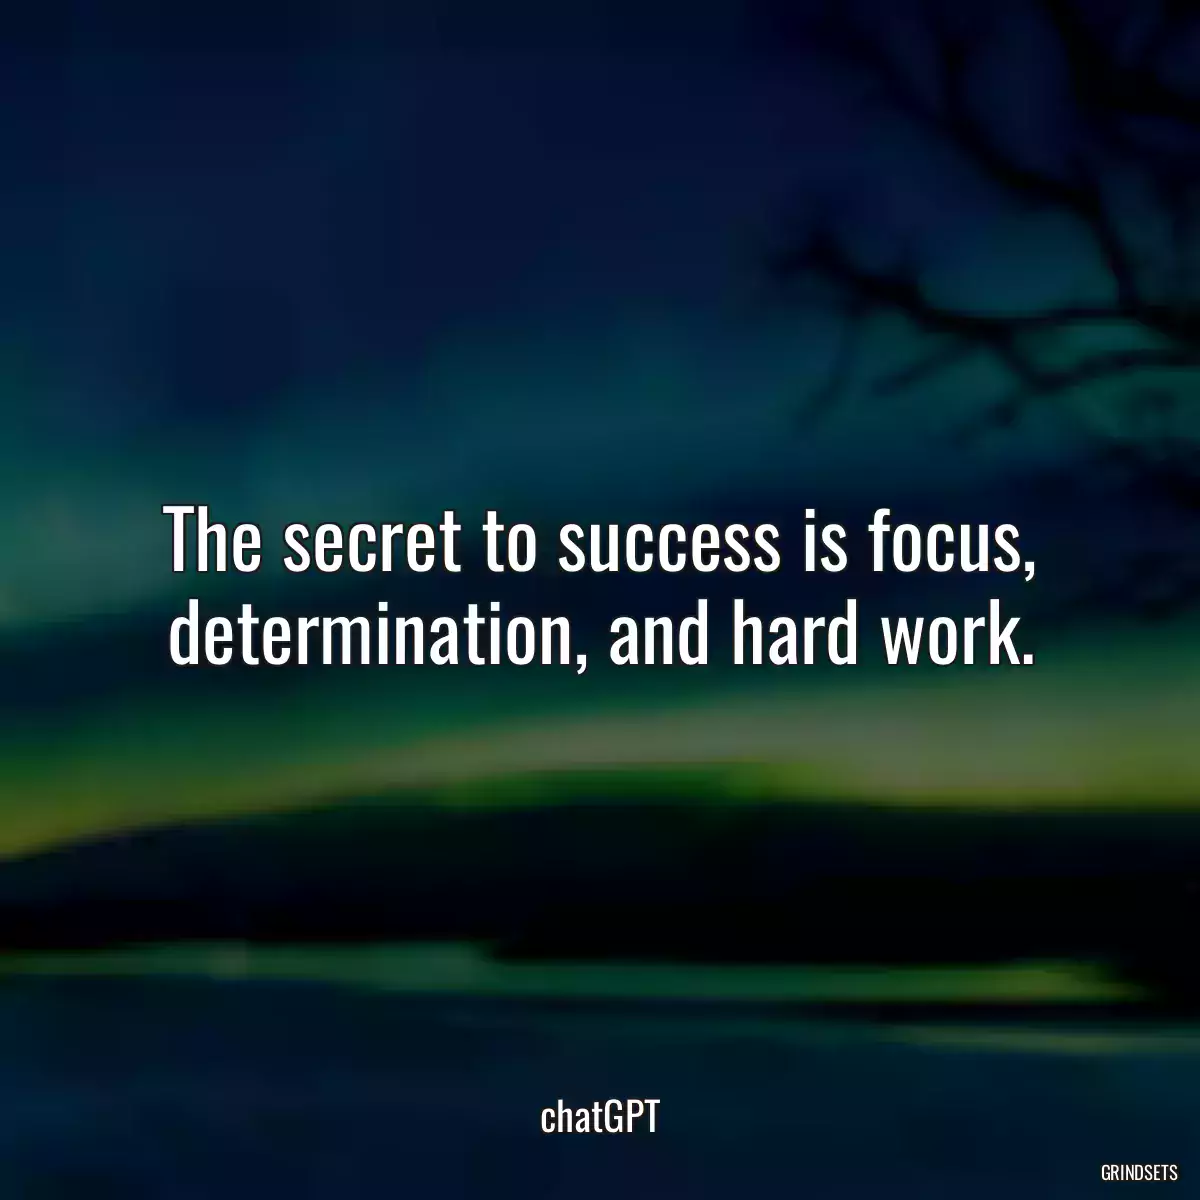 The secret to success is focus, determination, and hard work.